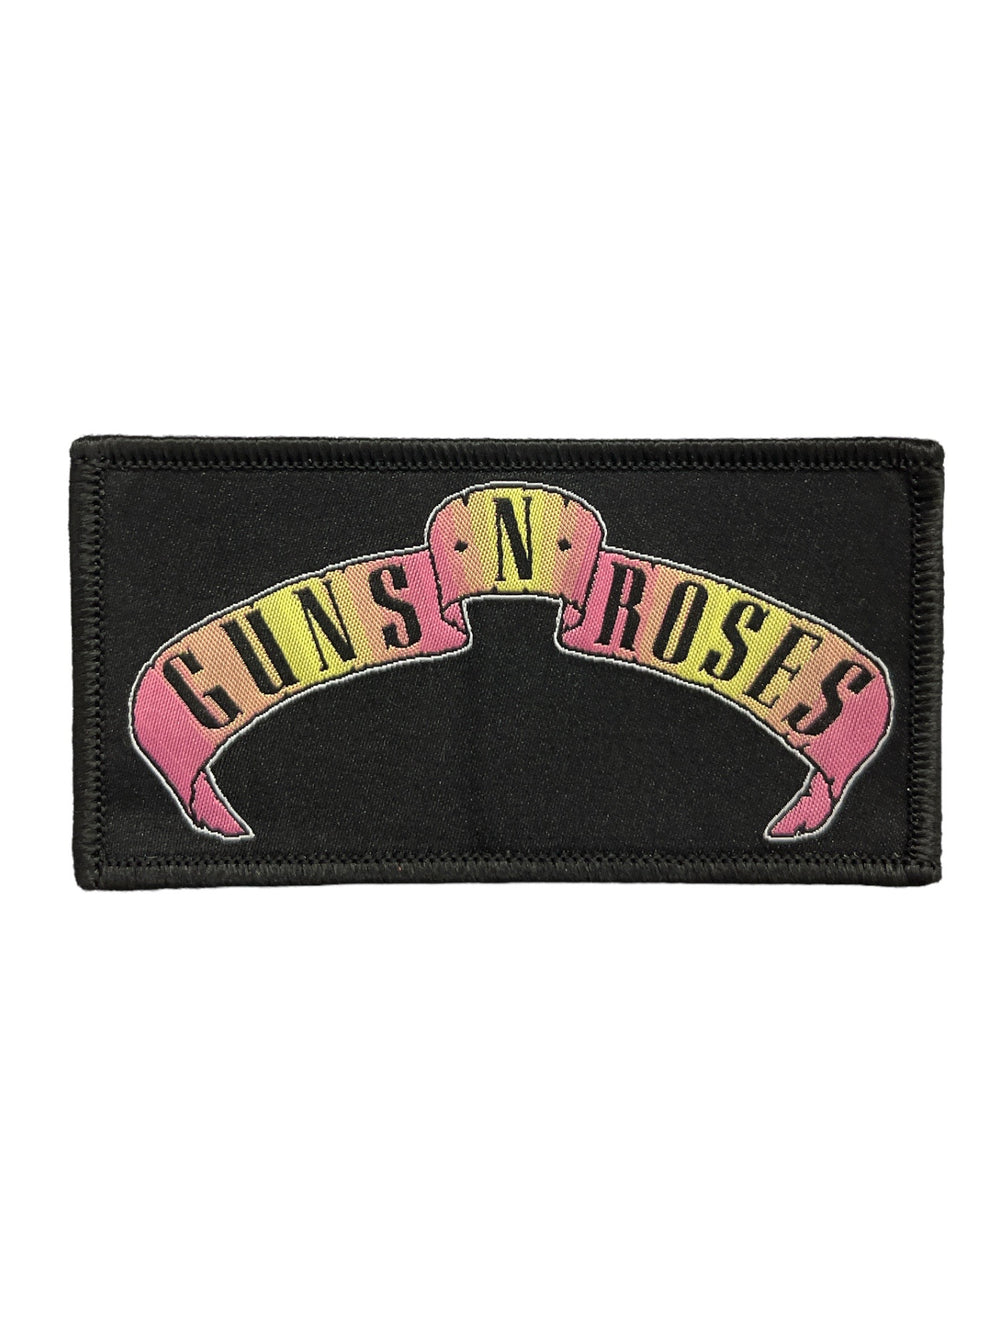 Guns n Roses Appetite Logo Official Woven Patch Brand New